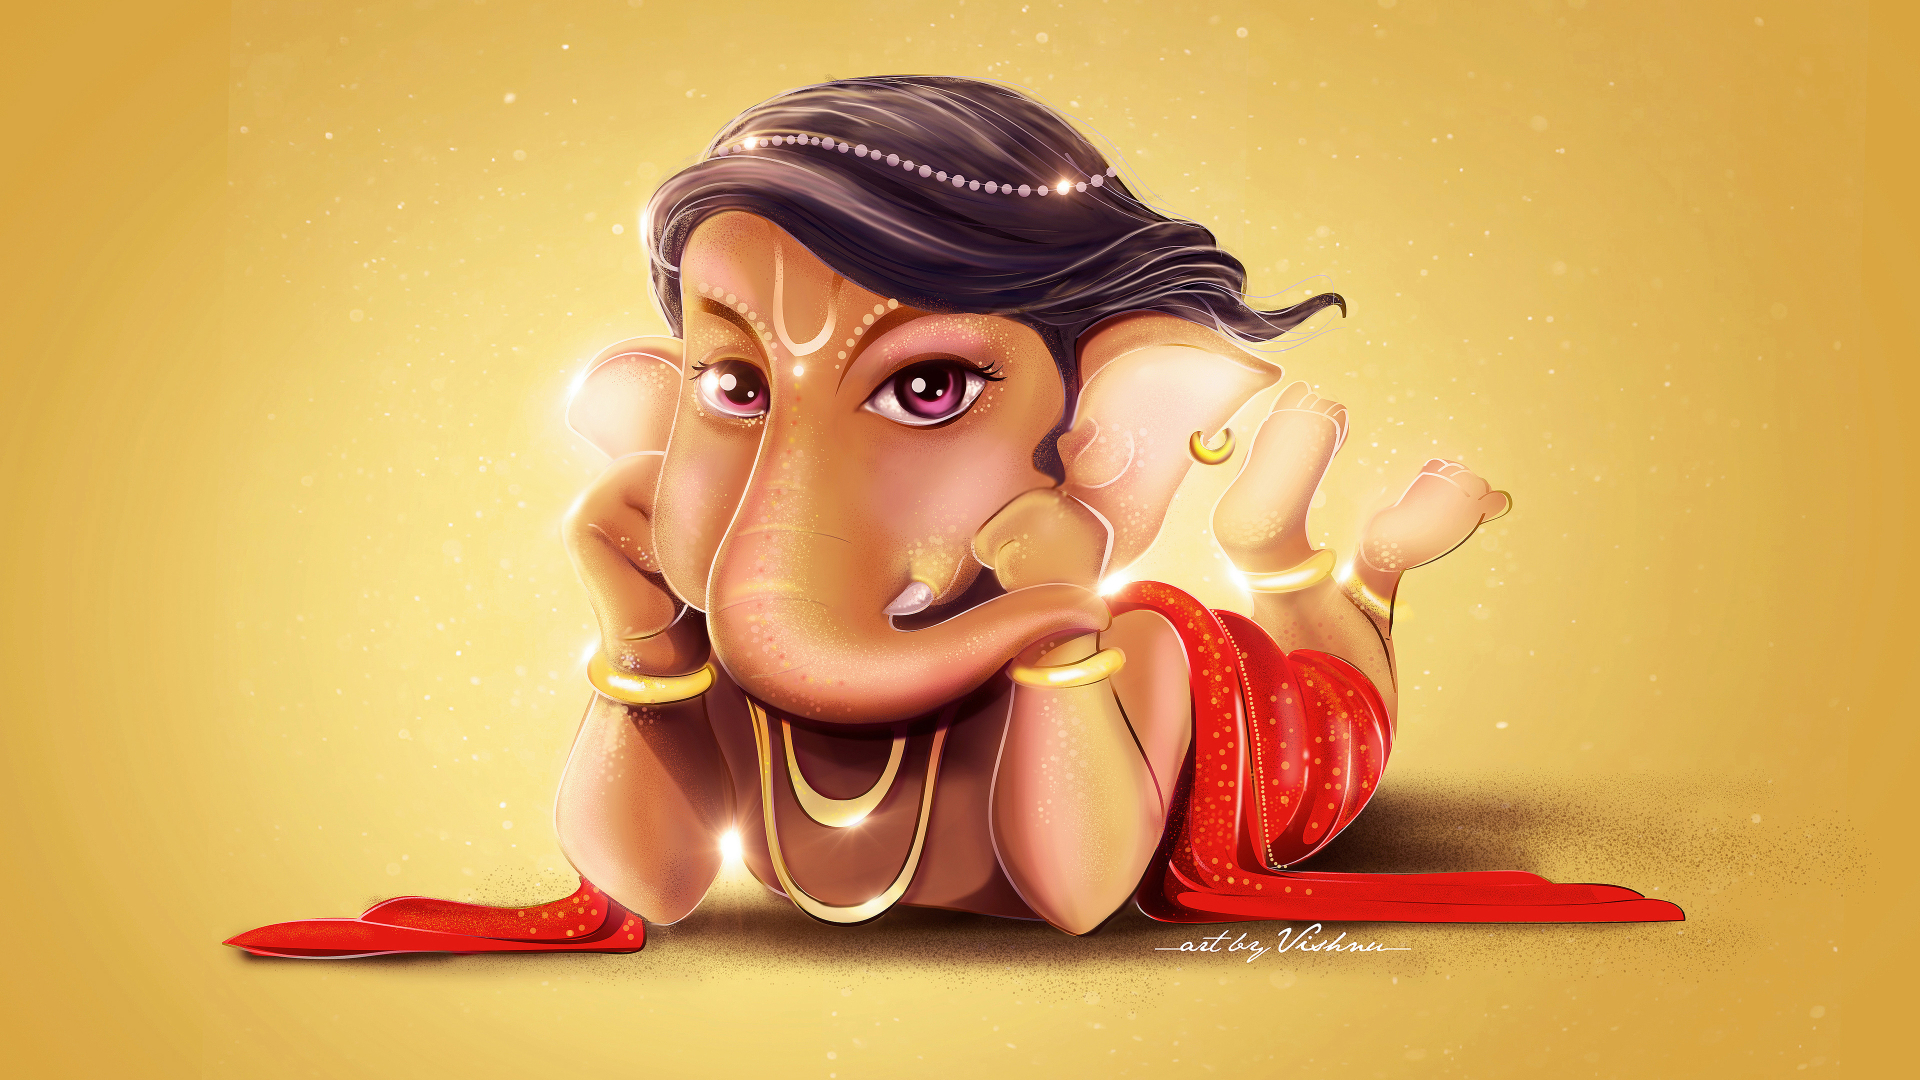 1920x1080 Cute Lord Ganesha 1080p Laptop Full Hd Wallpaper Hd Other 4k Wallpapers Images Photos And Background